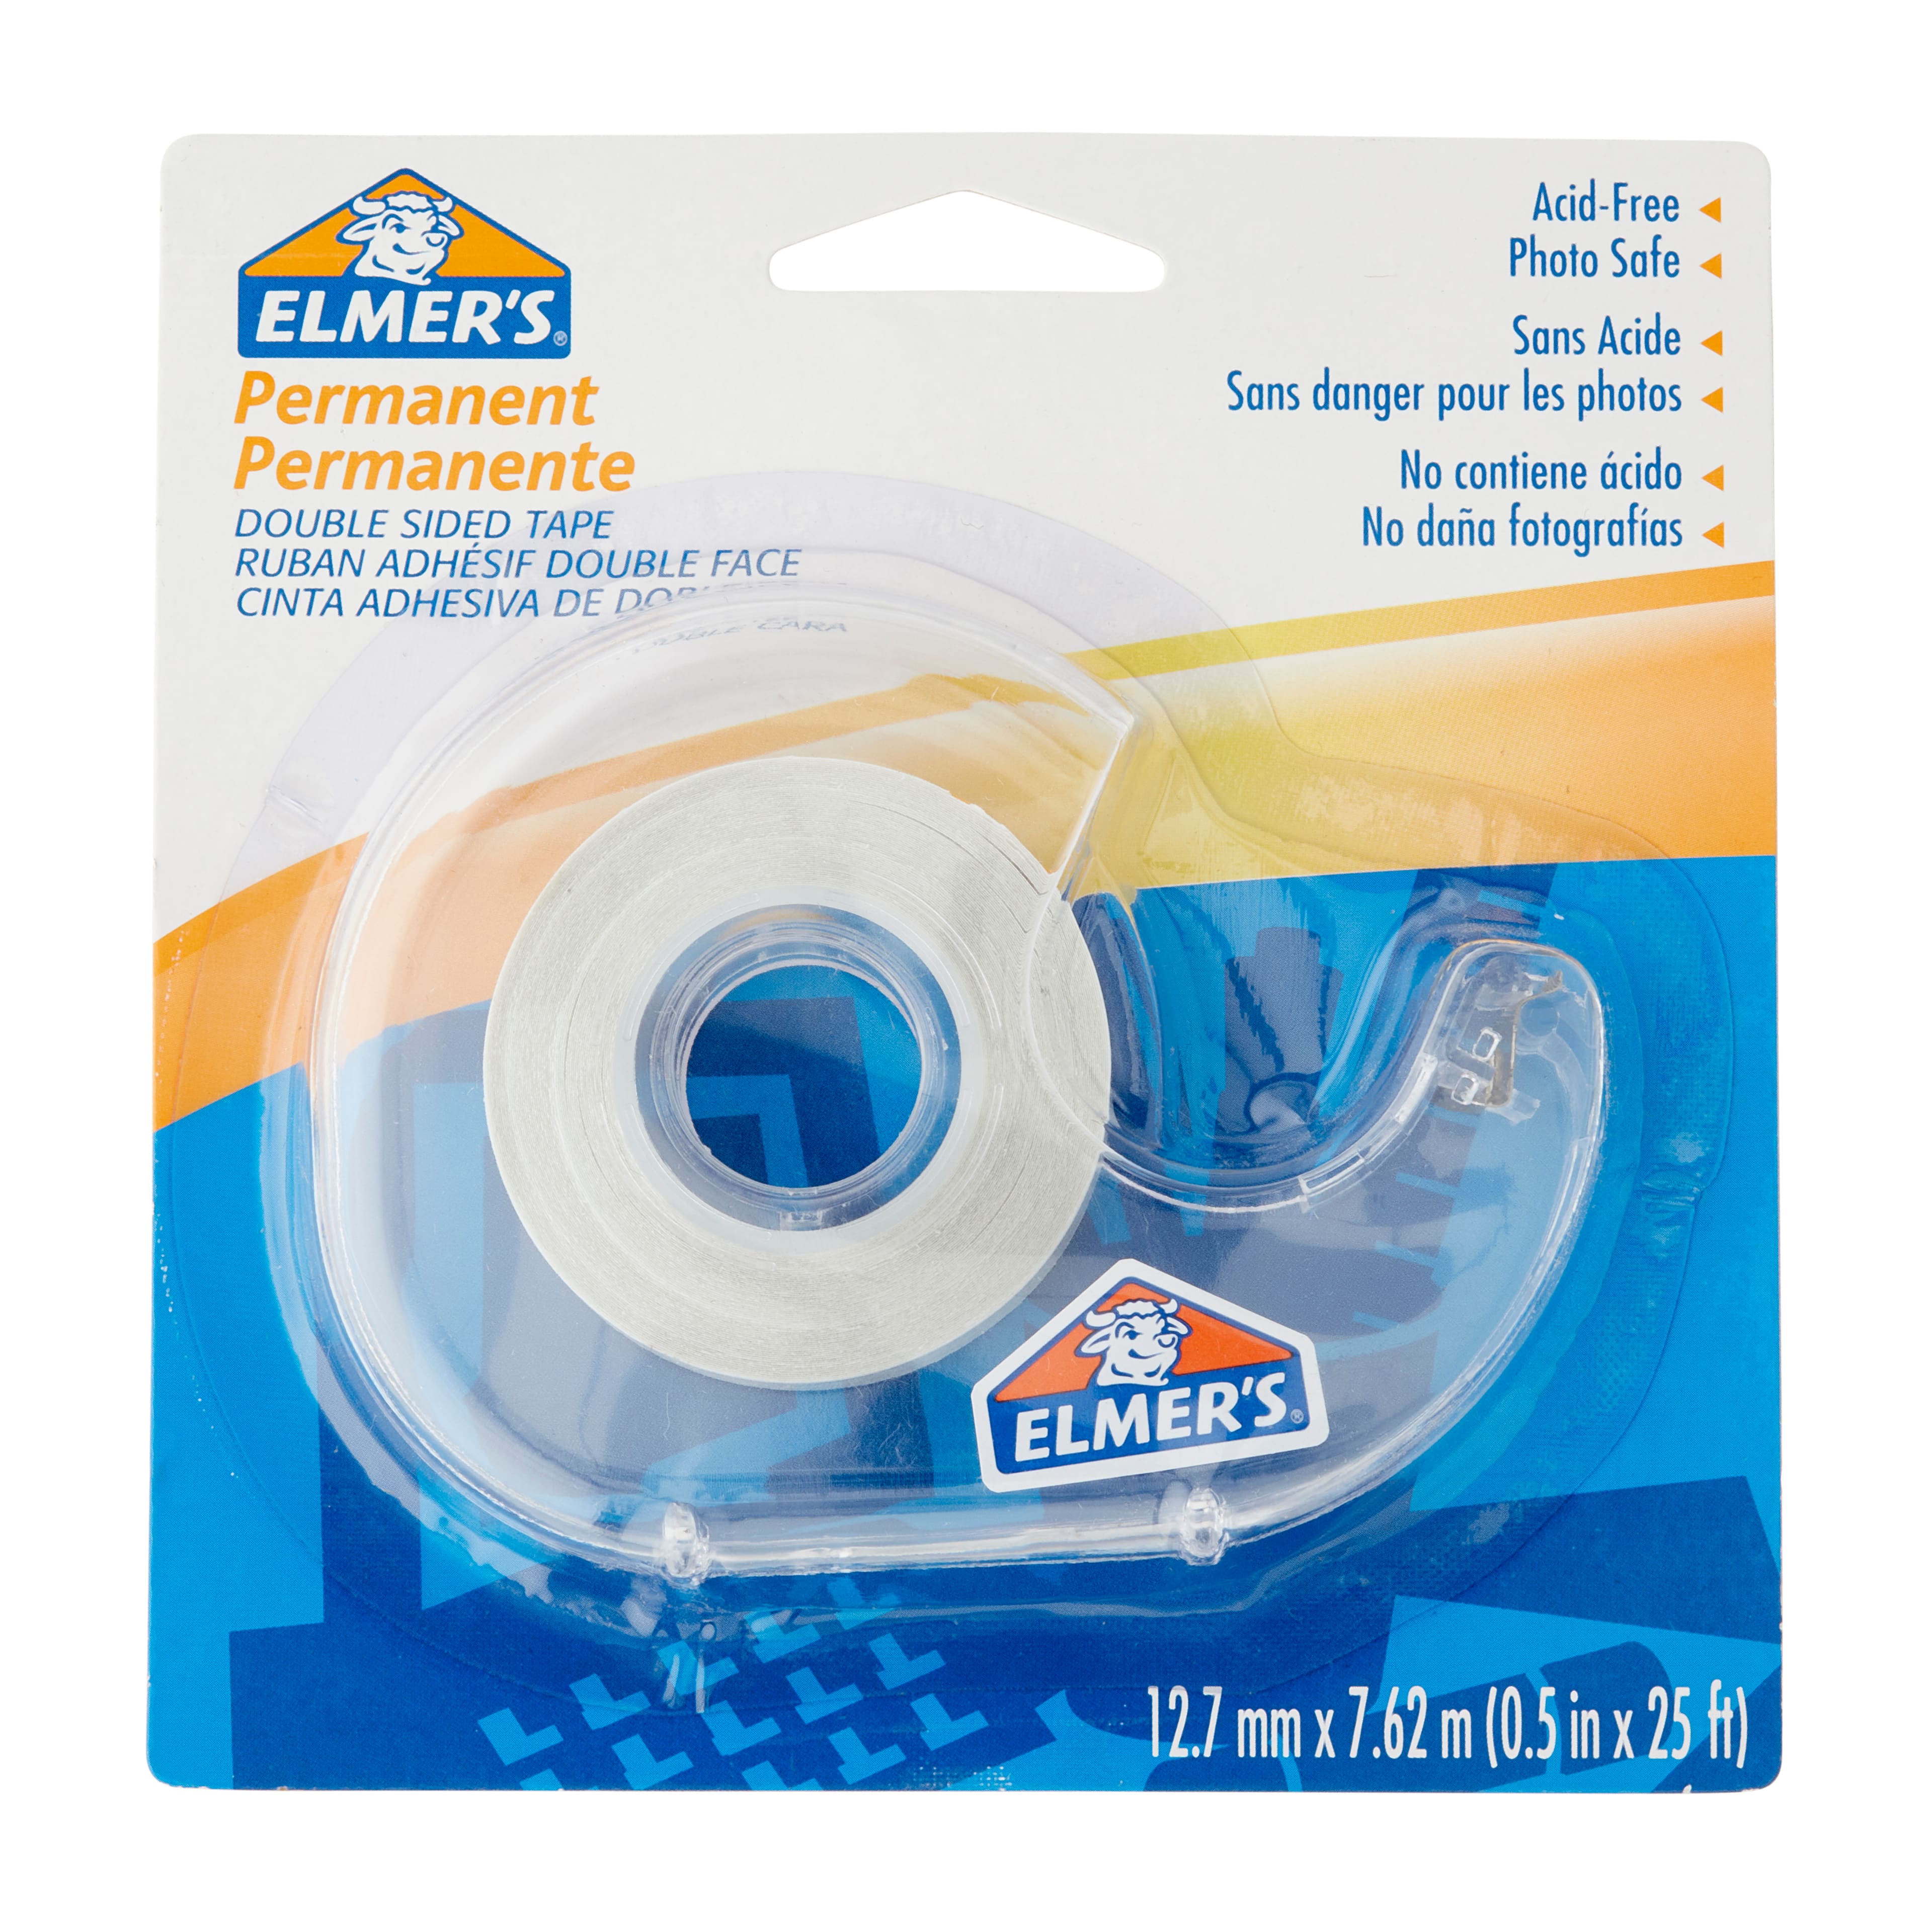 Elmer's Permanent Double Sided Tape, Size: 25' x 0.5, Clear